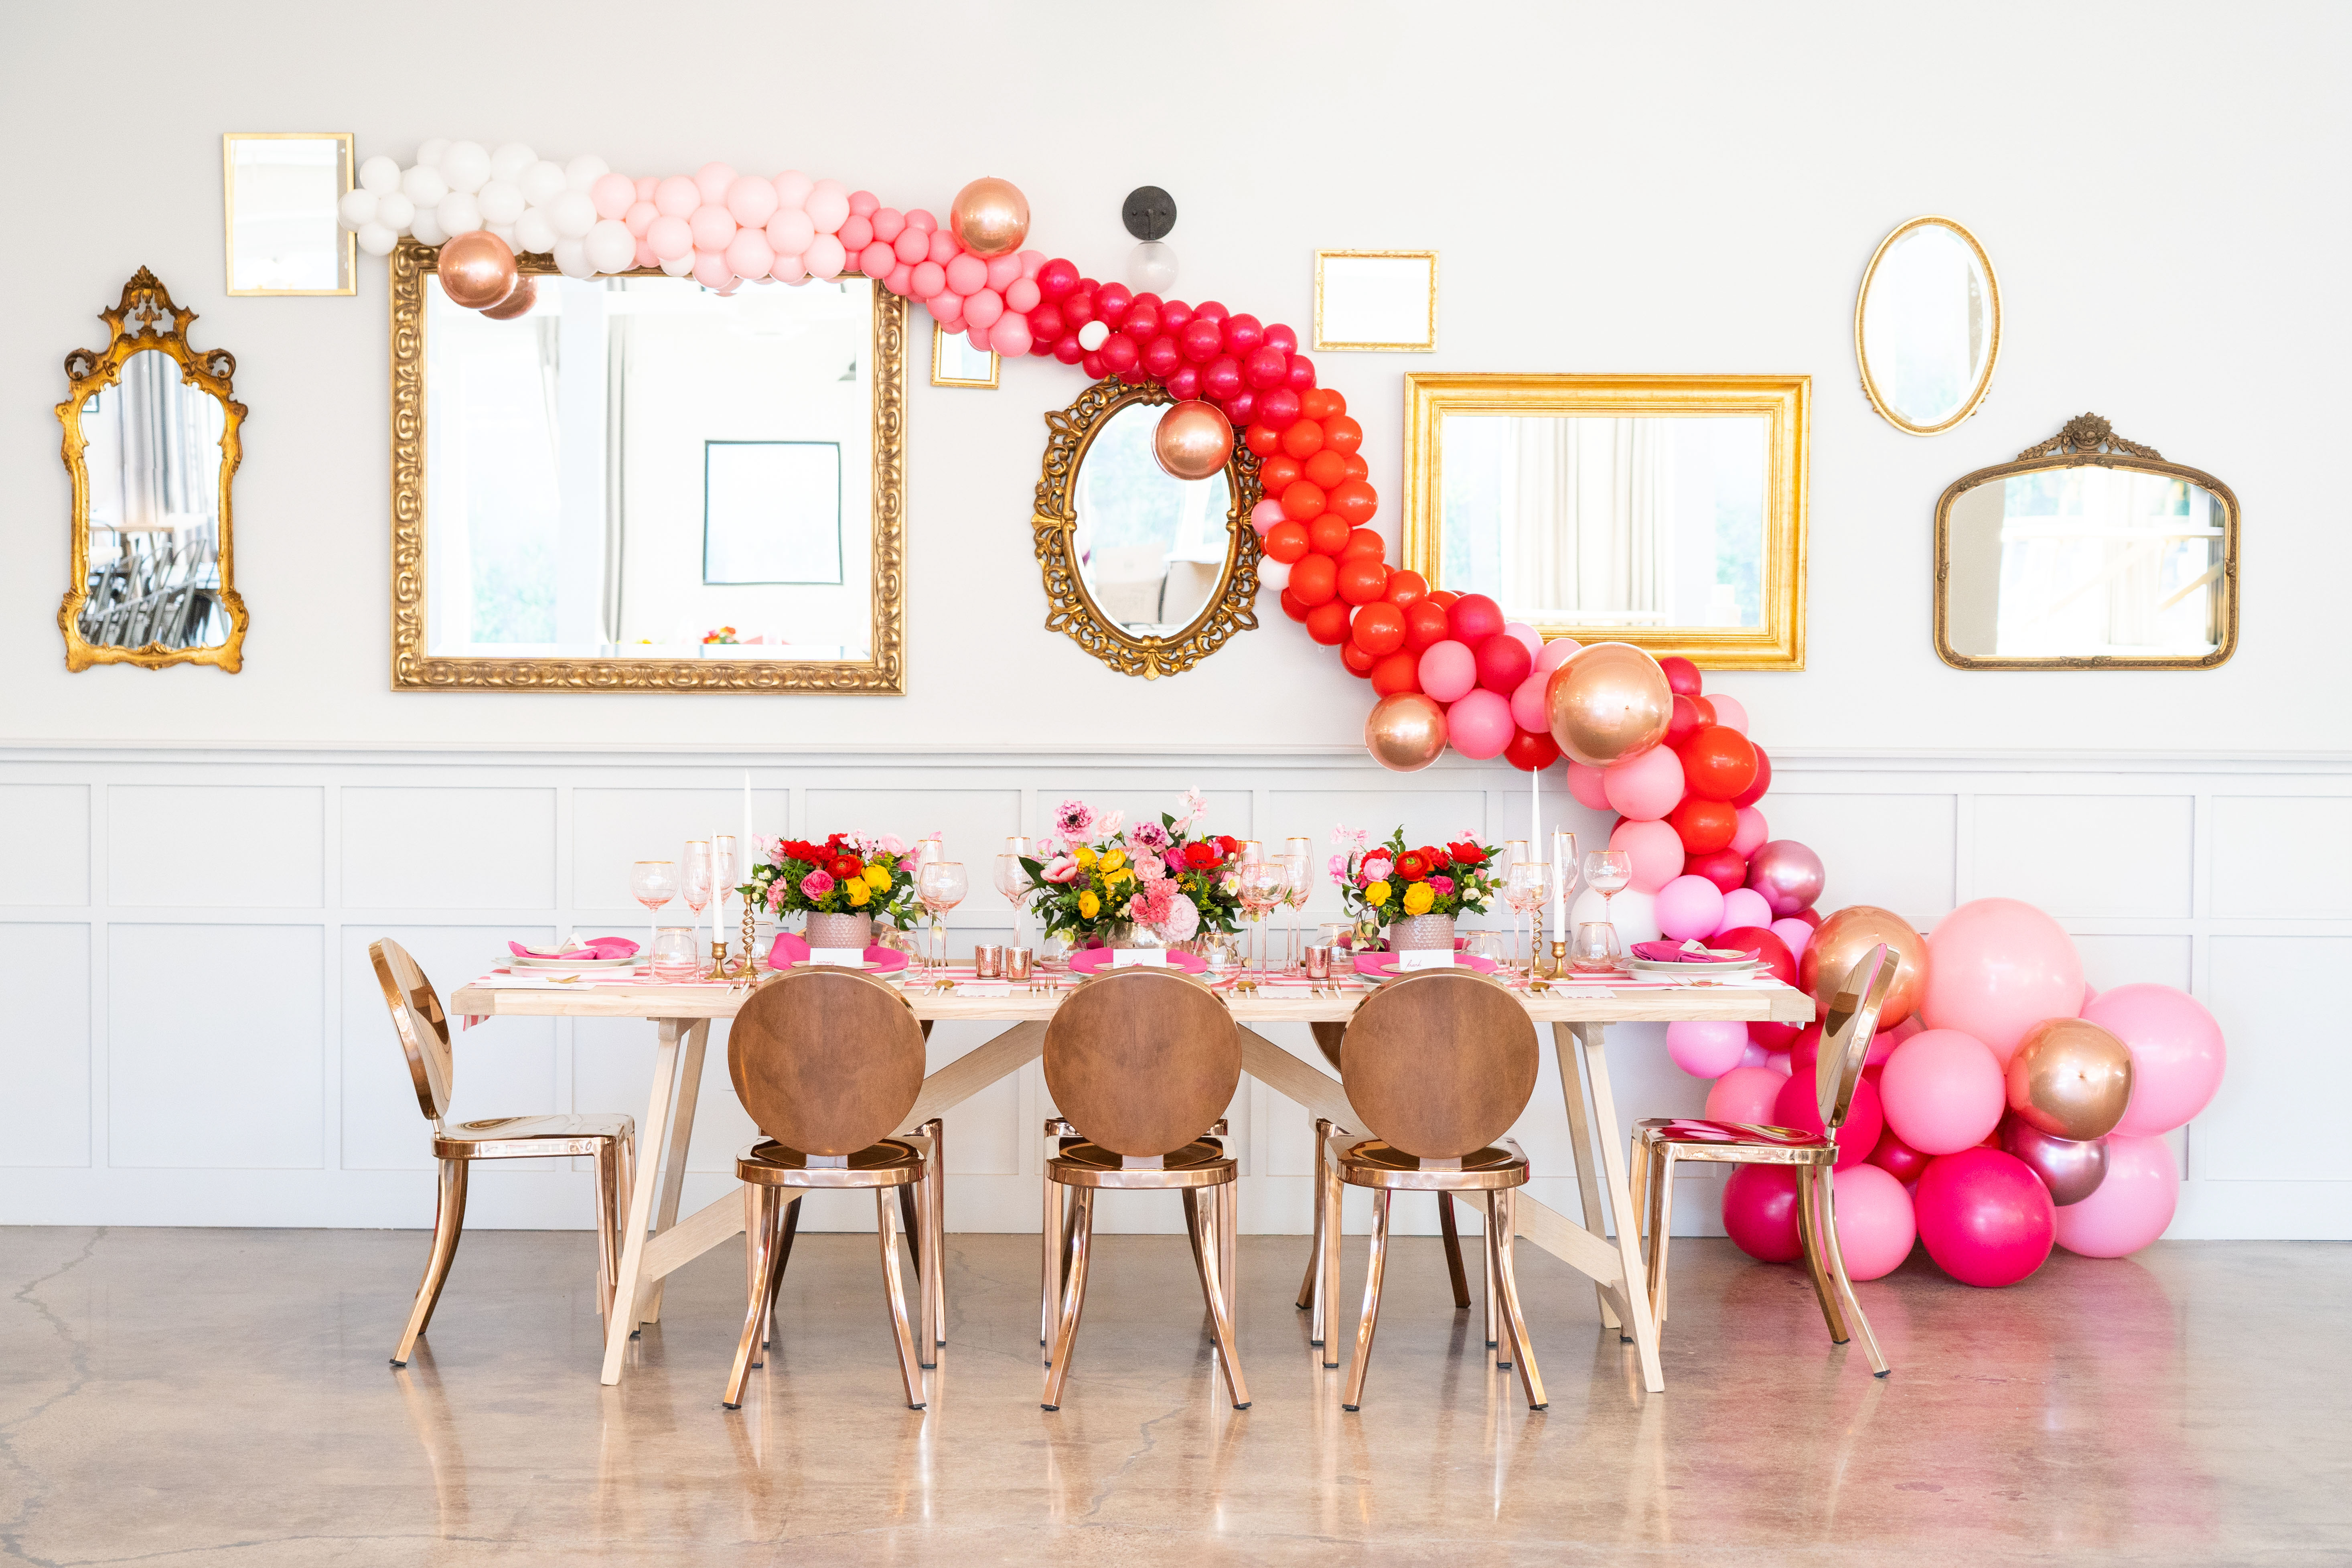 The quirky Valentine's Day-themed reception space featuring a vibrant balloon installation, vintage gold hanging mirrors, and lush yellow and red flower table arrangements by Winston and Main. 